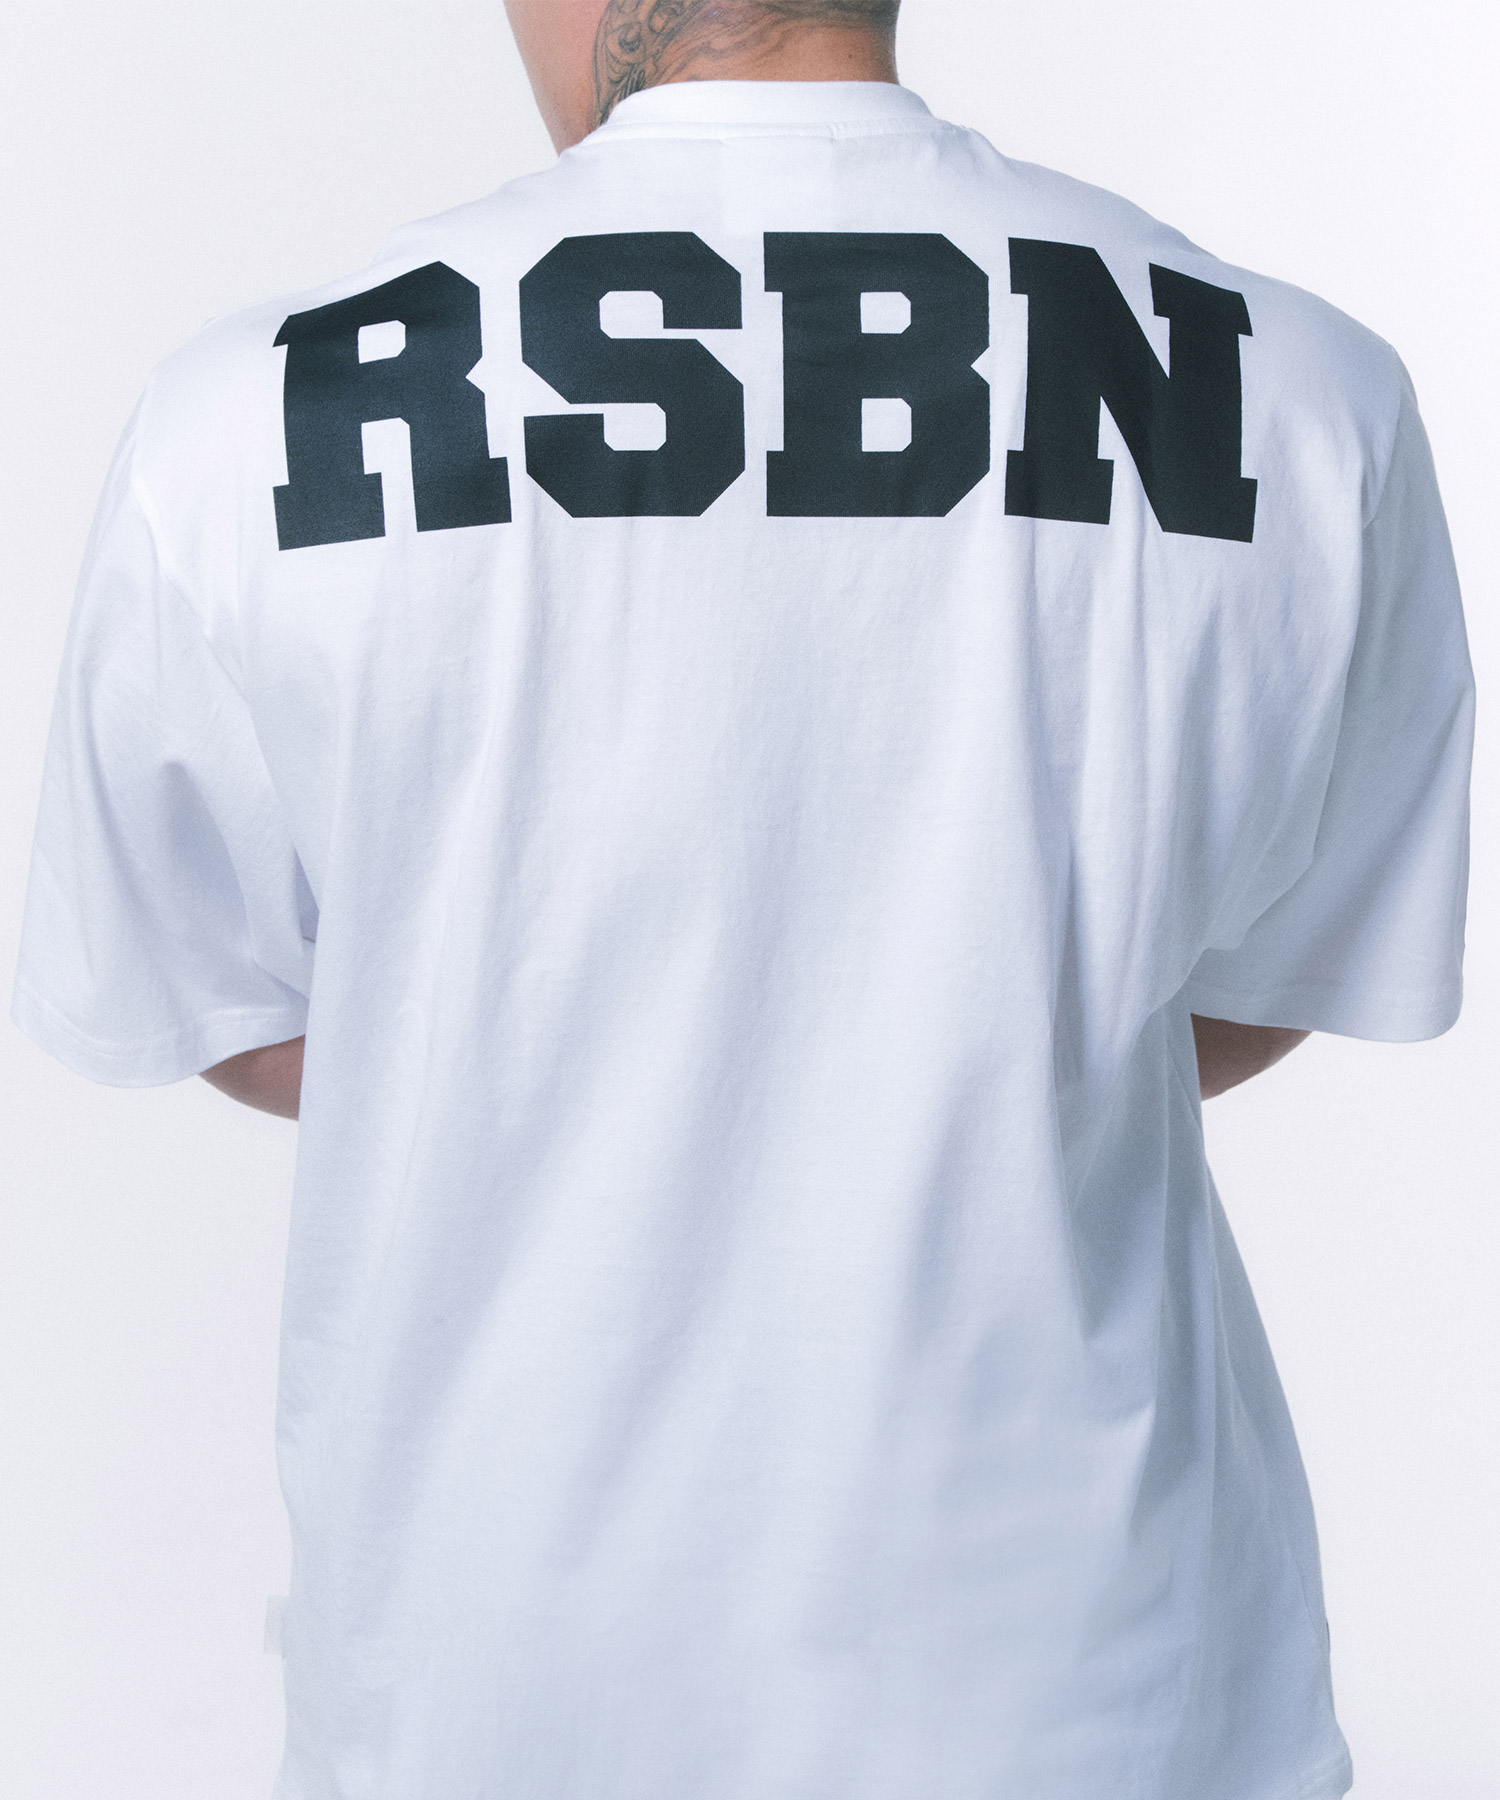 RSBN OVER FIT T-SHIRTS [WHITE]